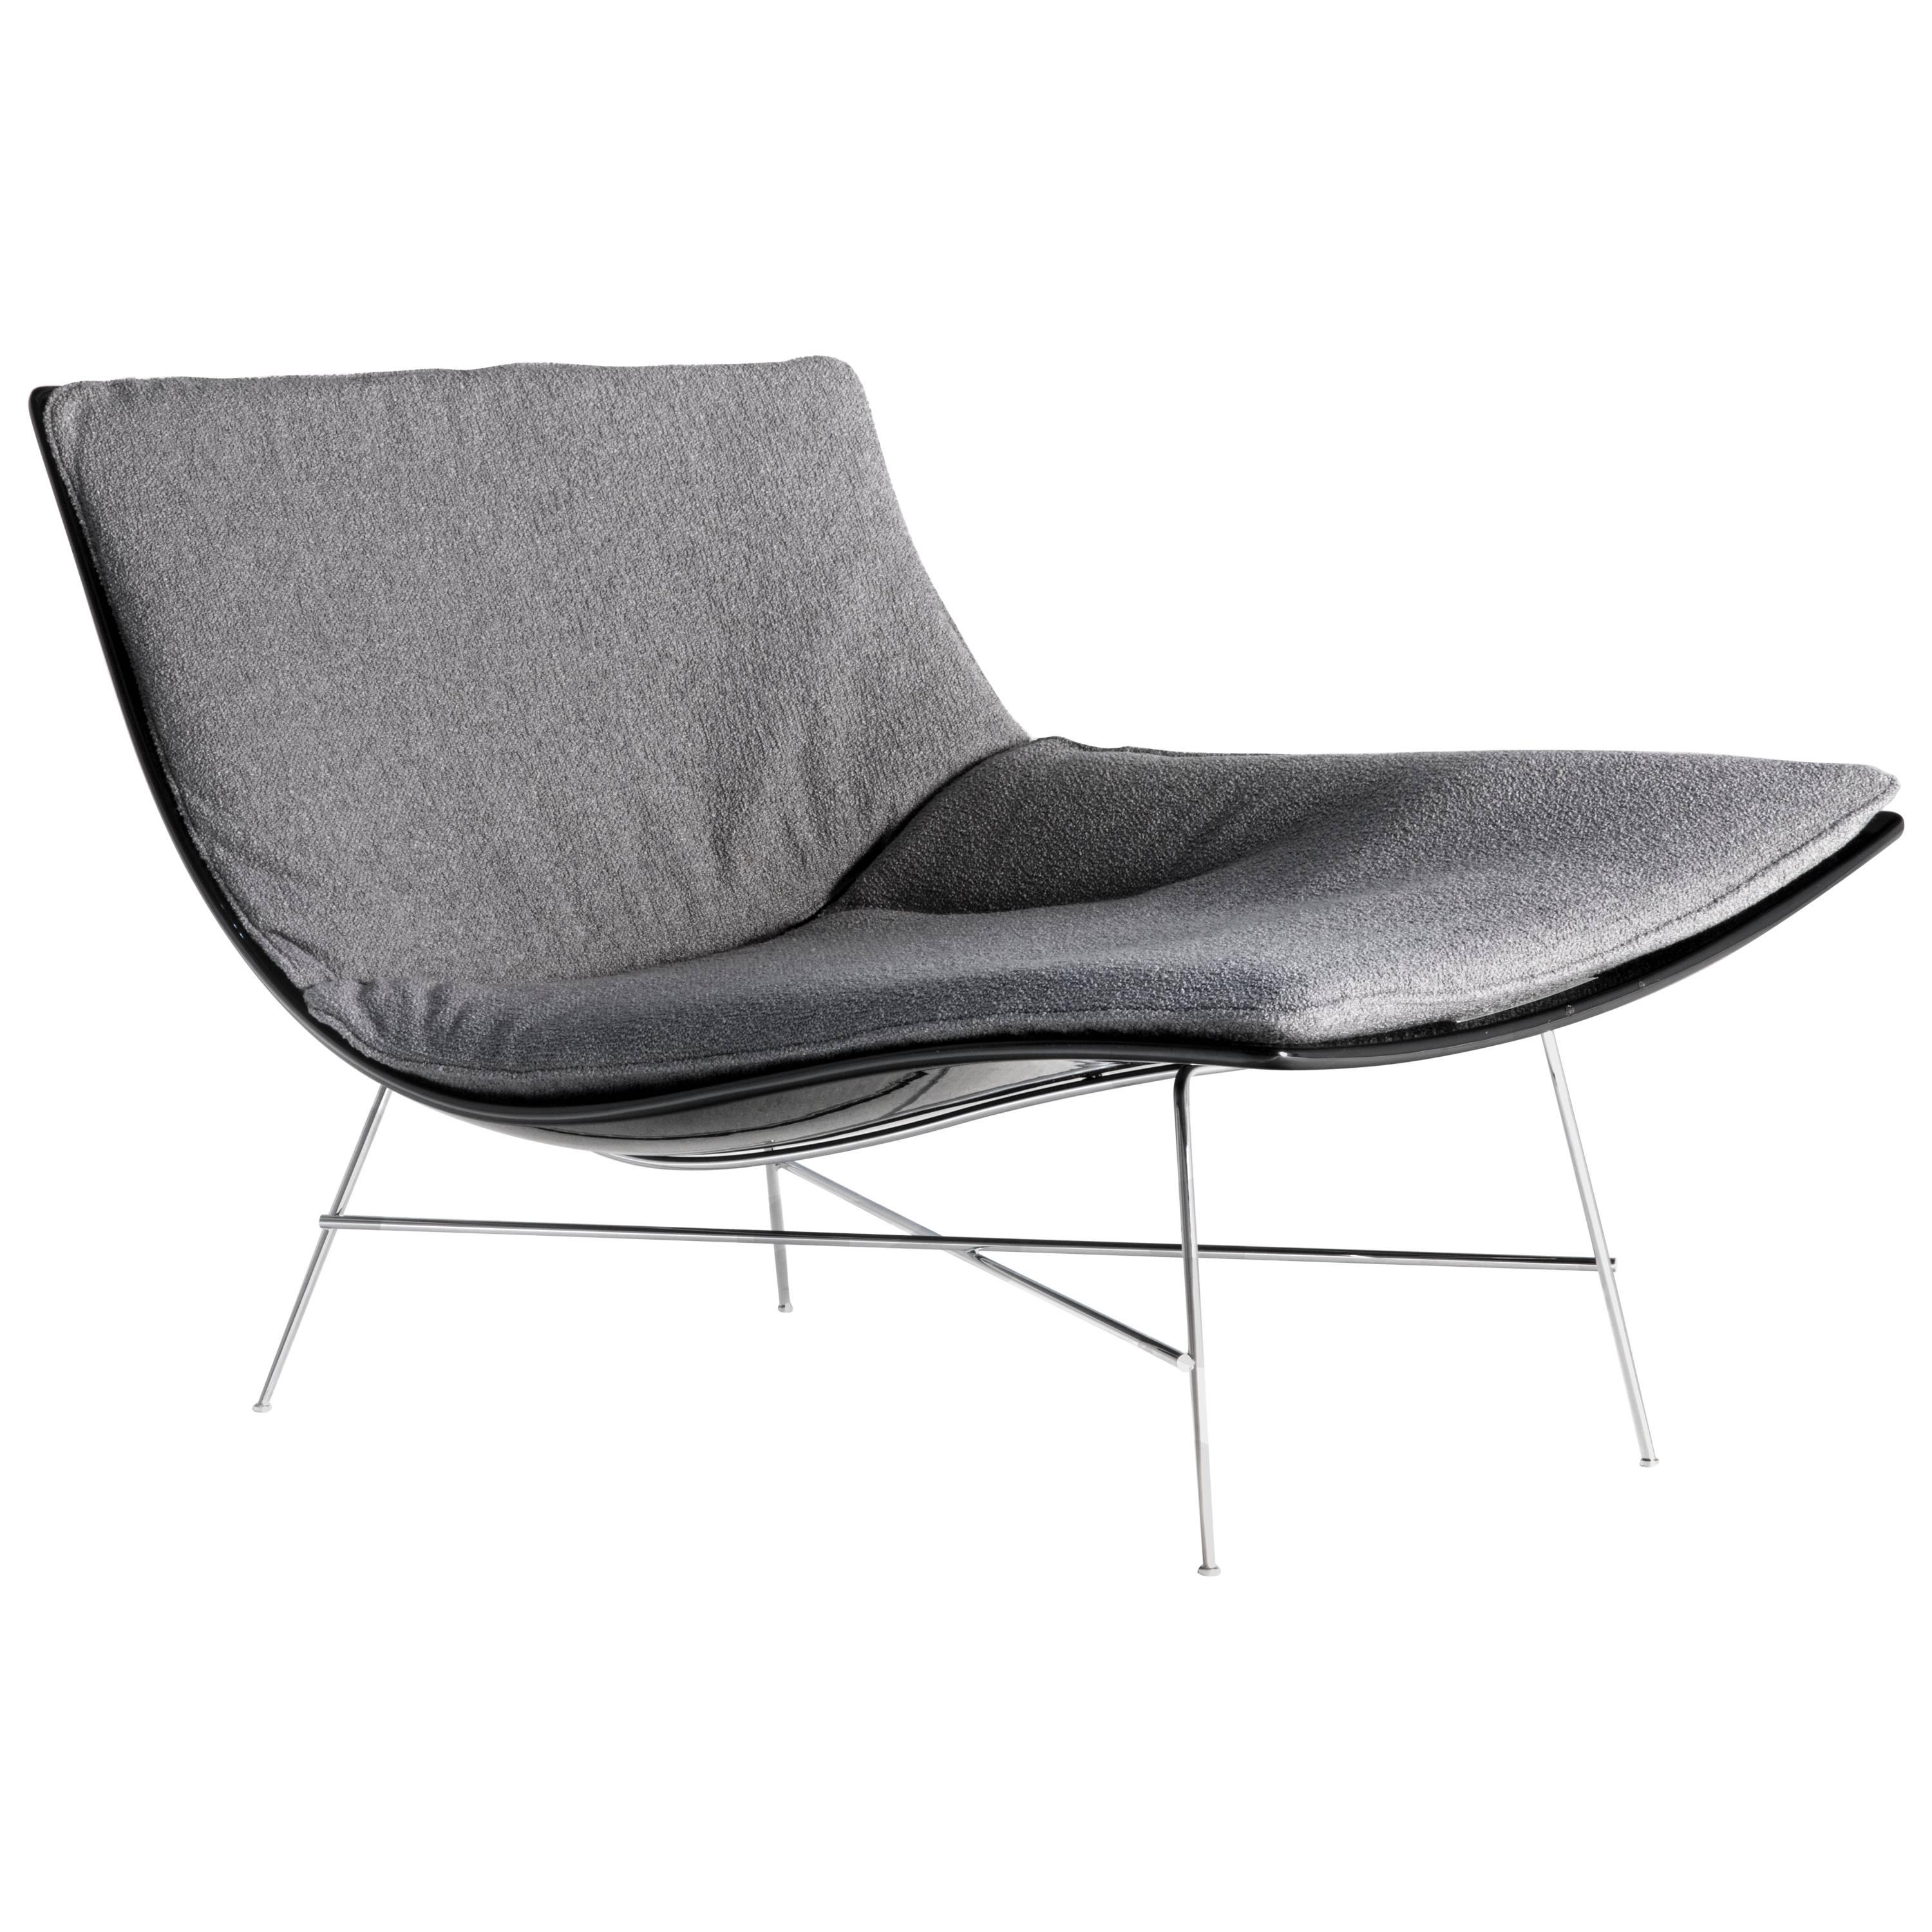 Full Moon Chair in Grey with Black Lacquered Shell by Ludovica & Roberto Palomba